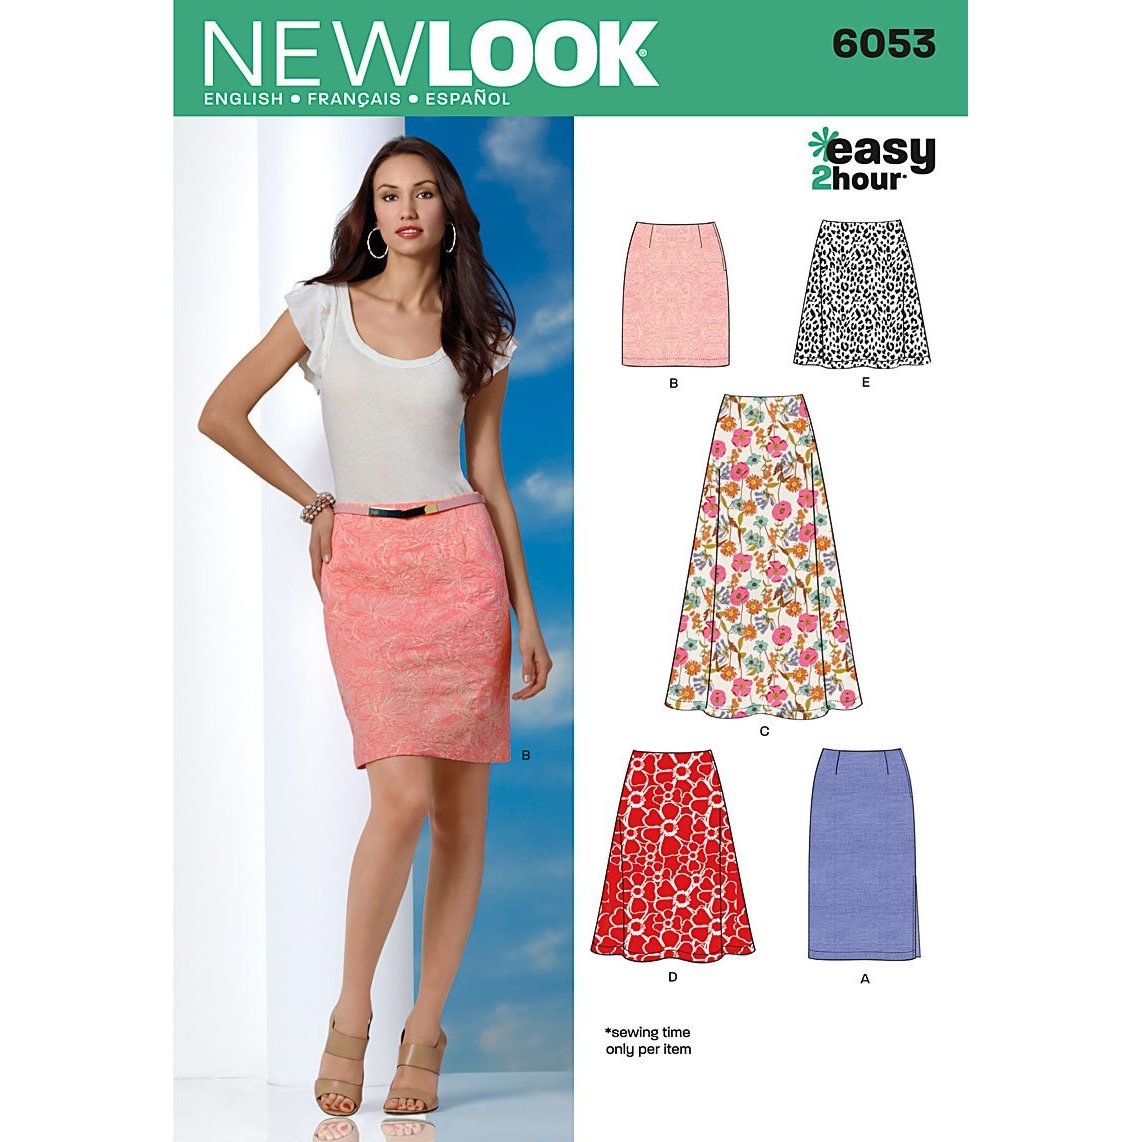 New Look 6053 Size A 8/10/12/14/16/18 Misses Skirts Easy 2 Hour Sewing Pattern, Multi-Colour